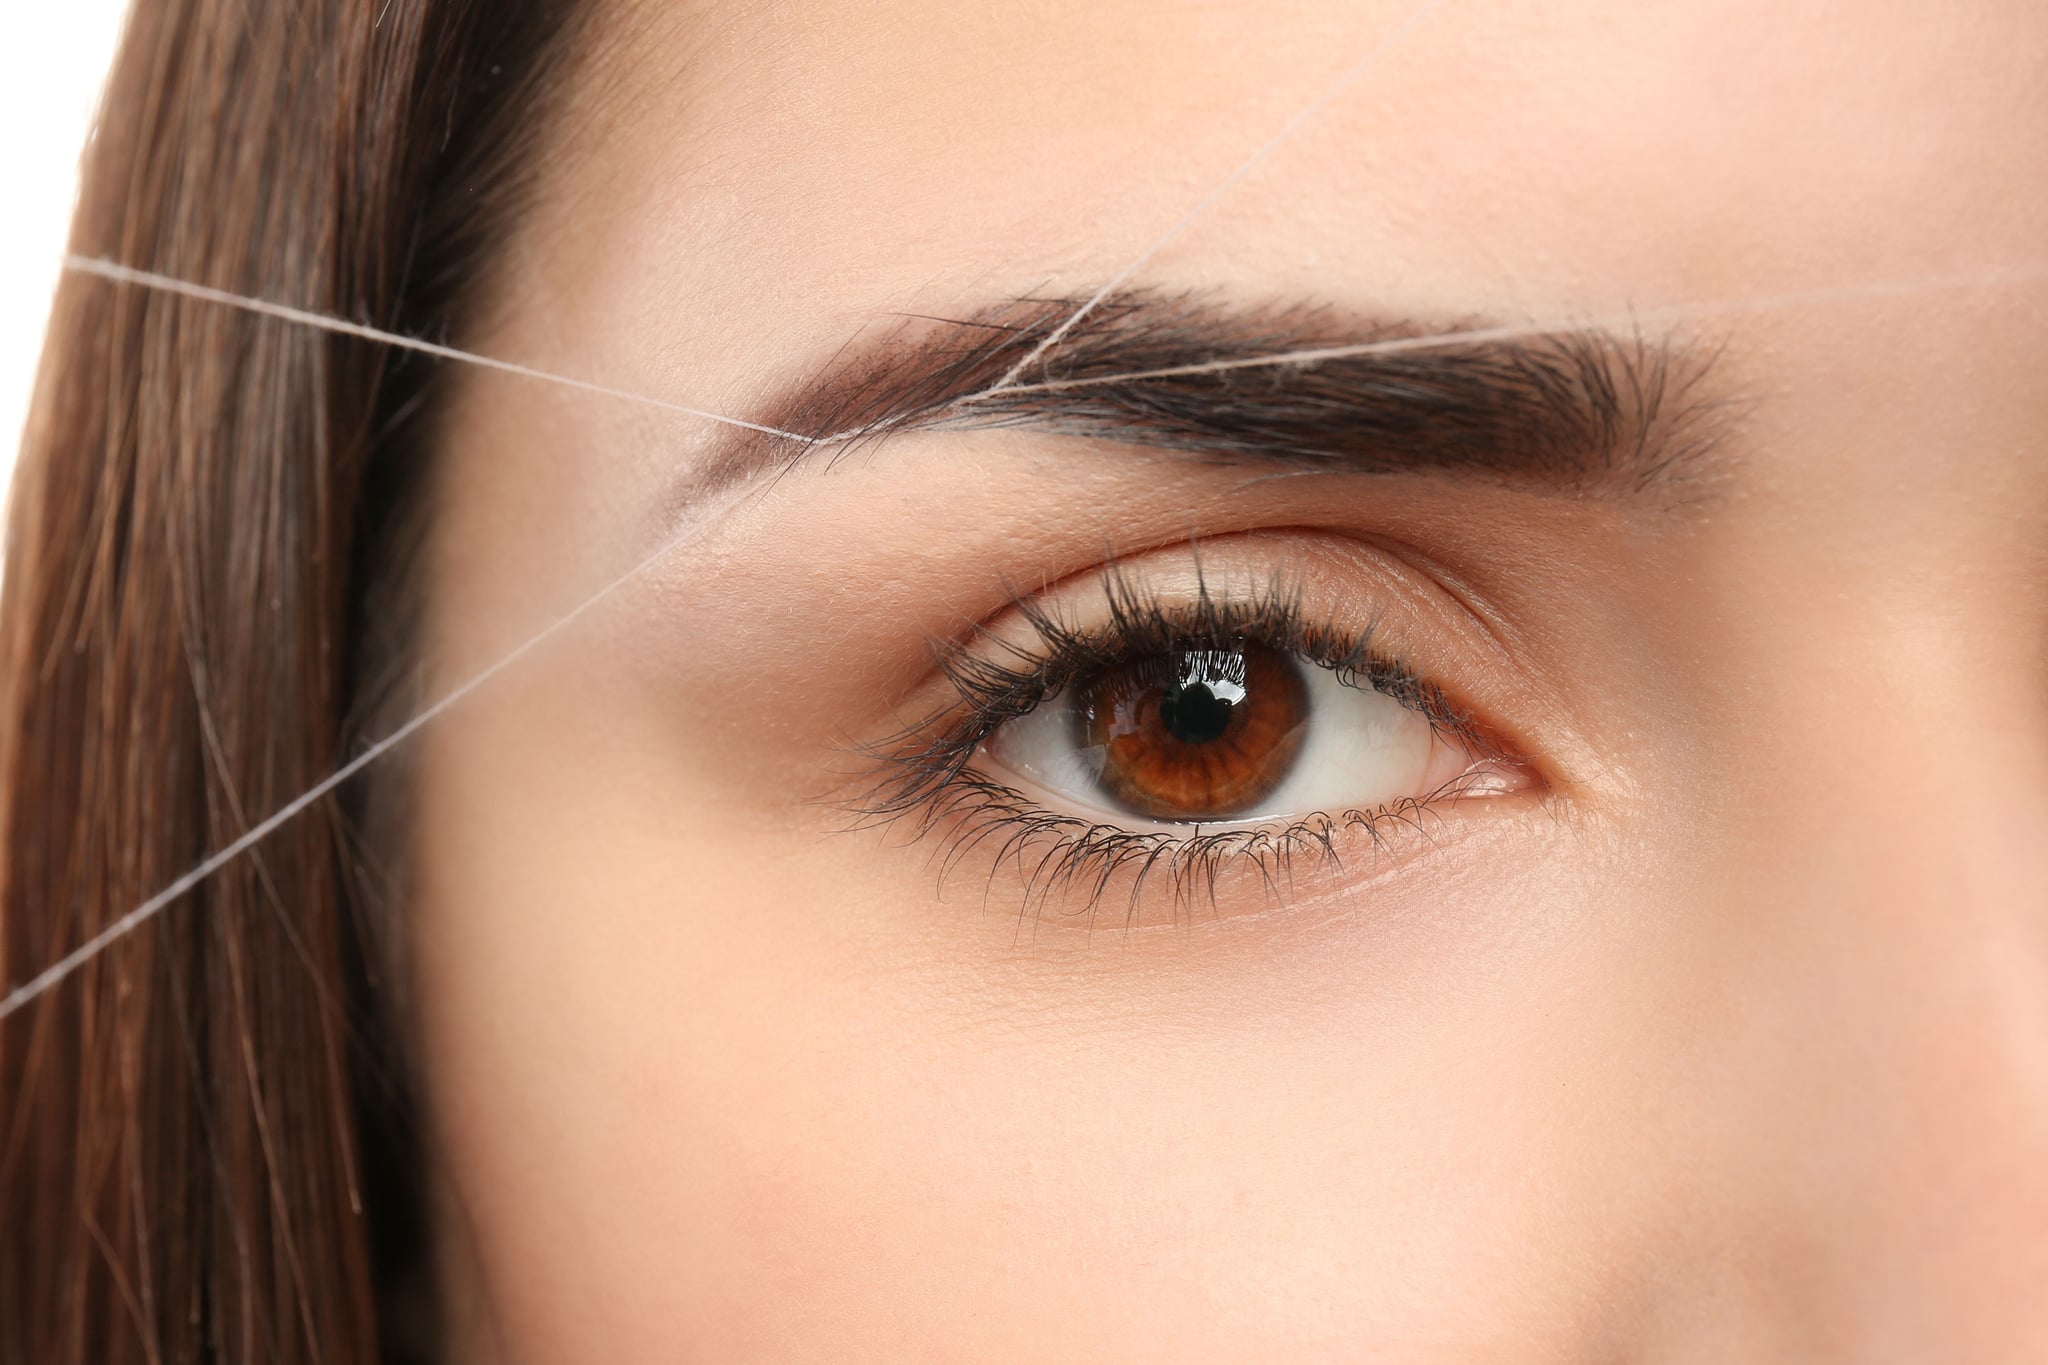 Eyebrows Threading: How to Thread Eyebrows at Home Like a Pro See more